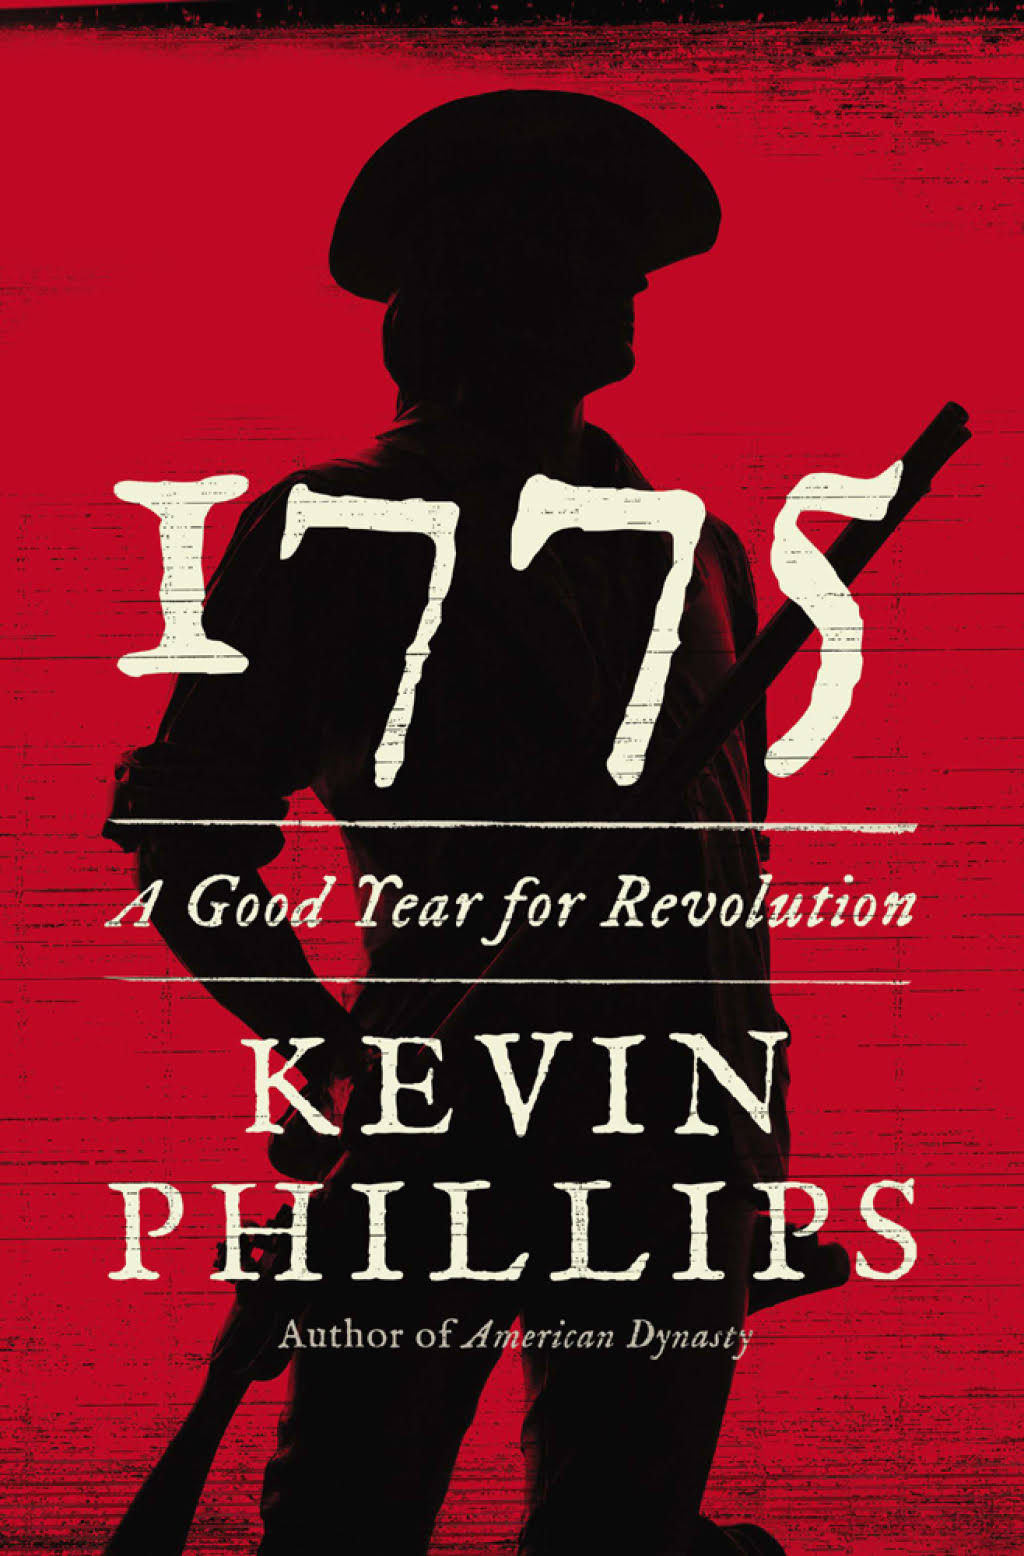 1775: A Good Year for Revolution [Book]